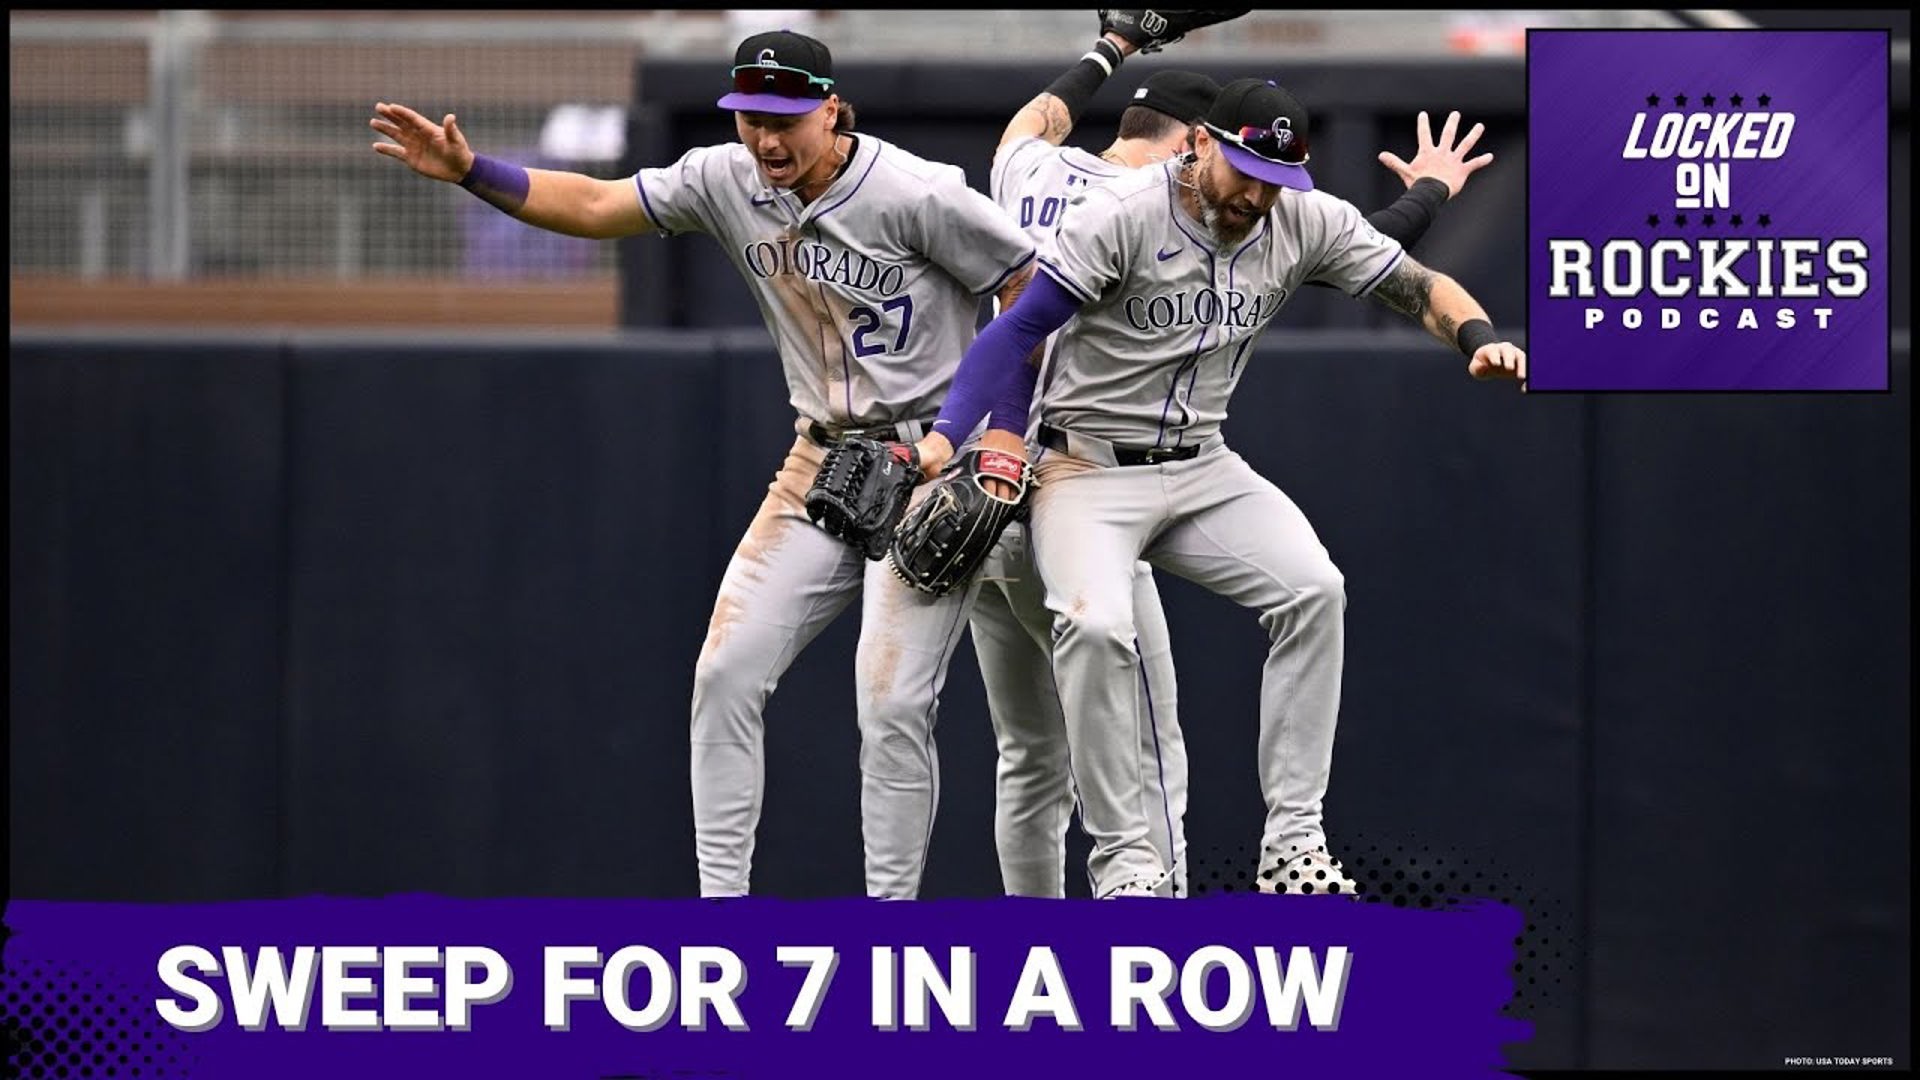 The Rockies winning streak hits seven as the team sweeps the Padres. What is working for the Rockies right now during this stretch?